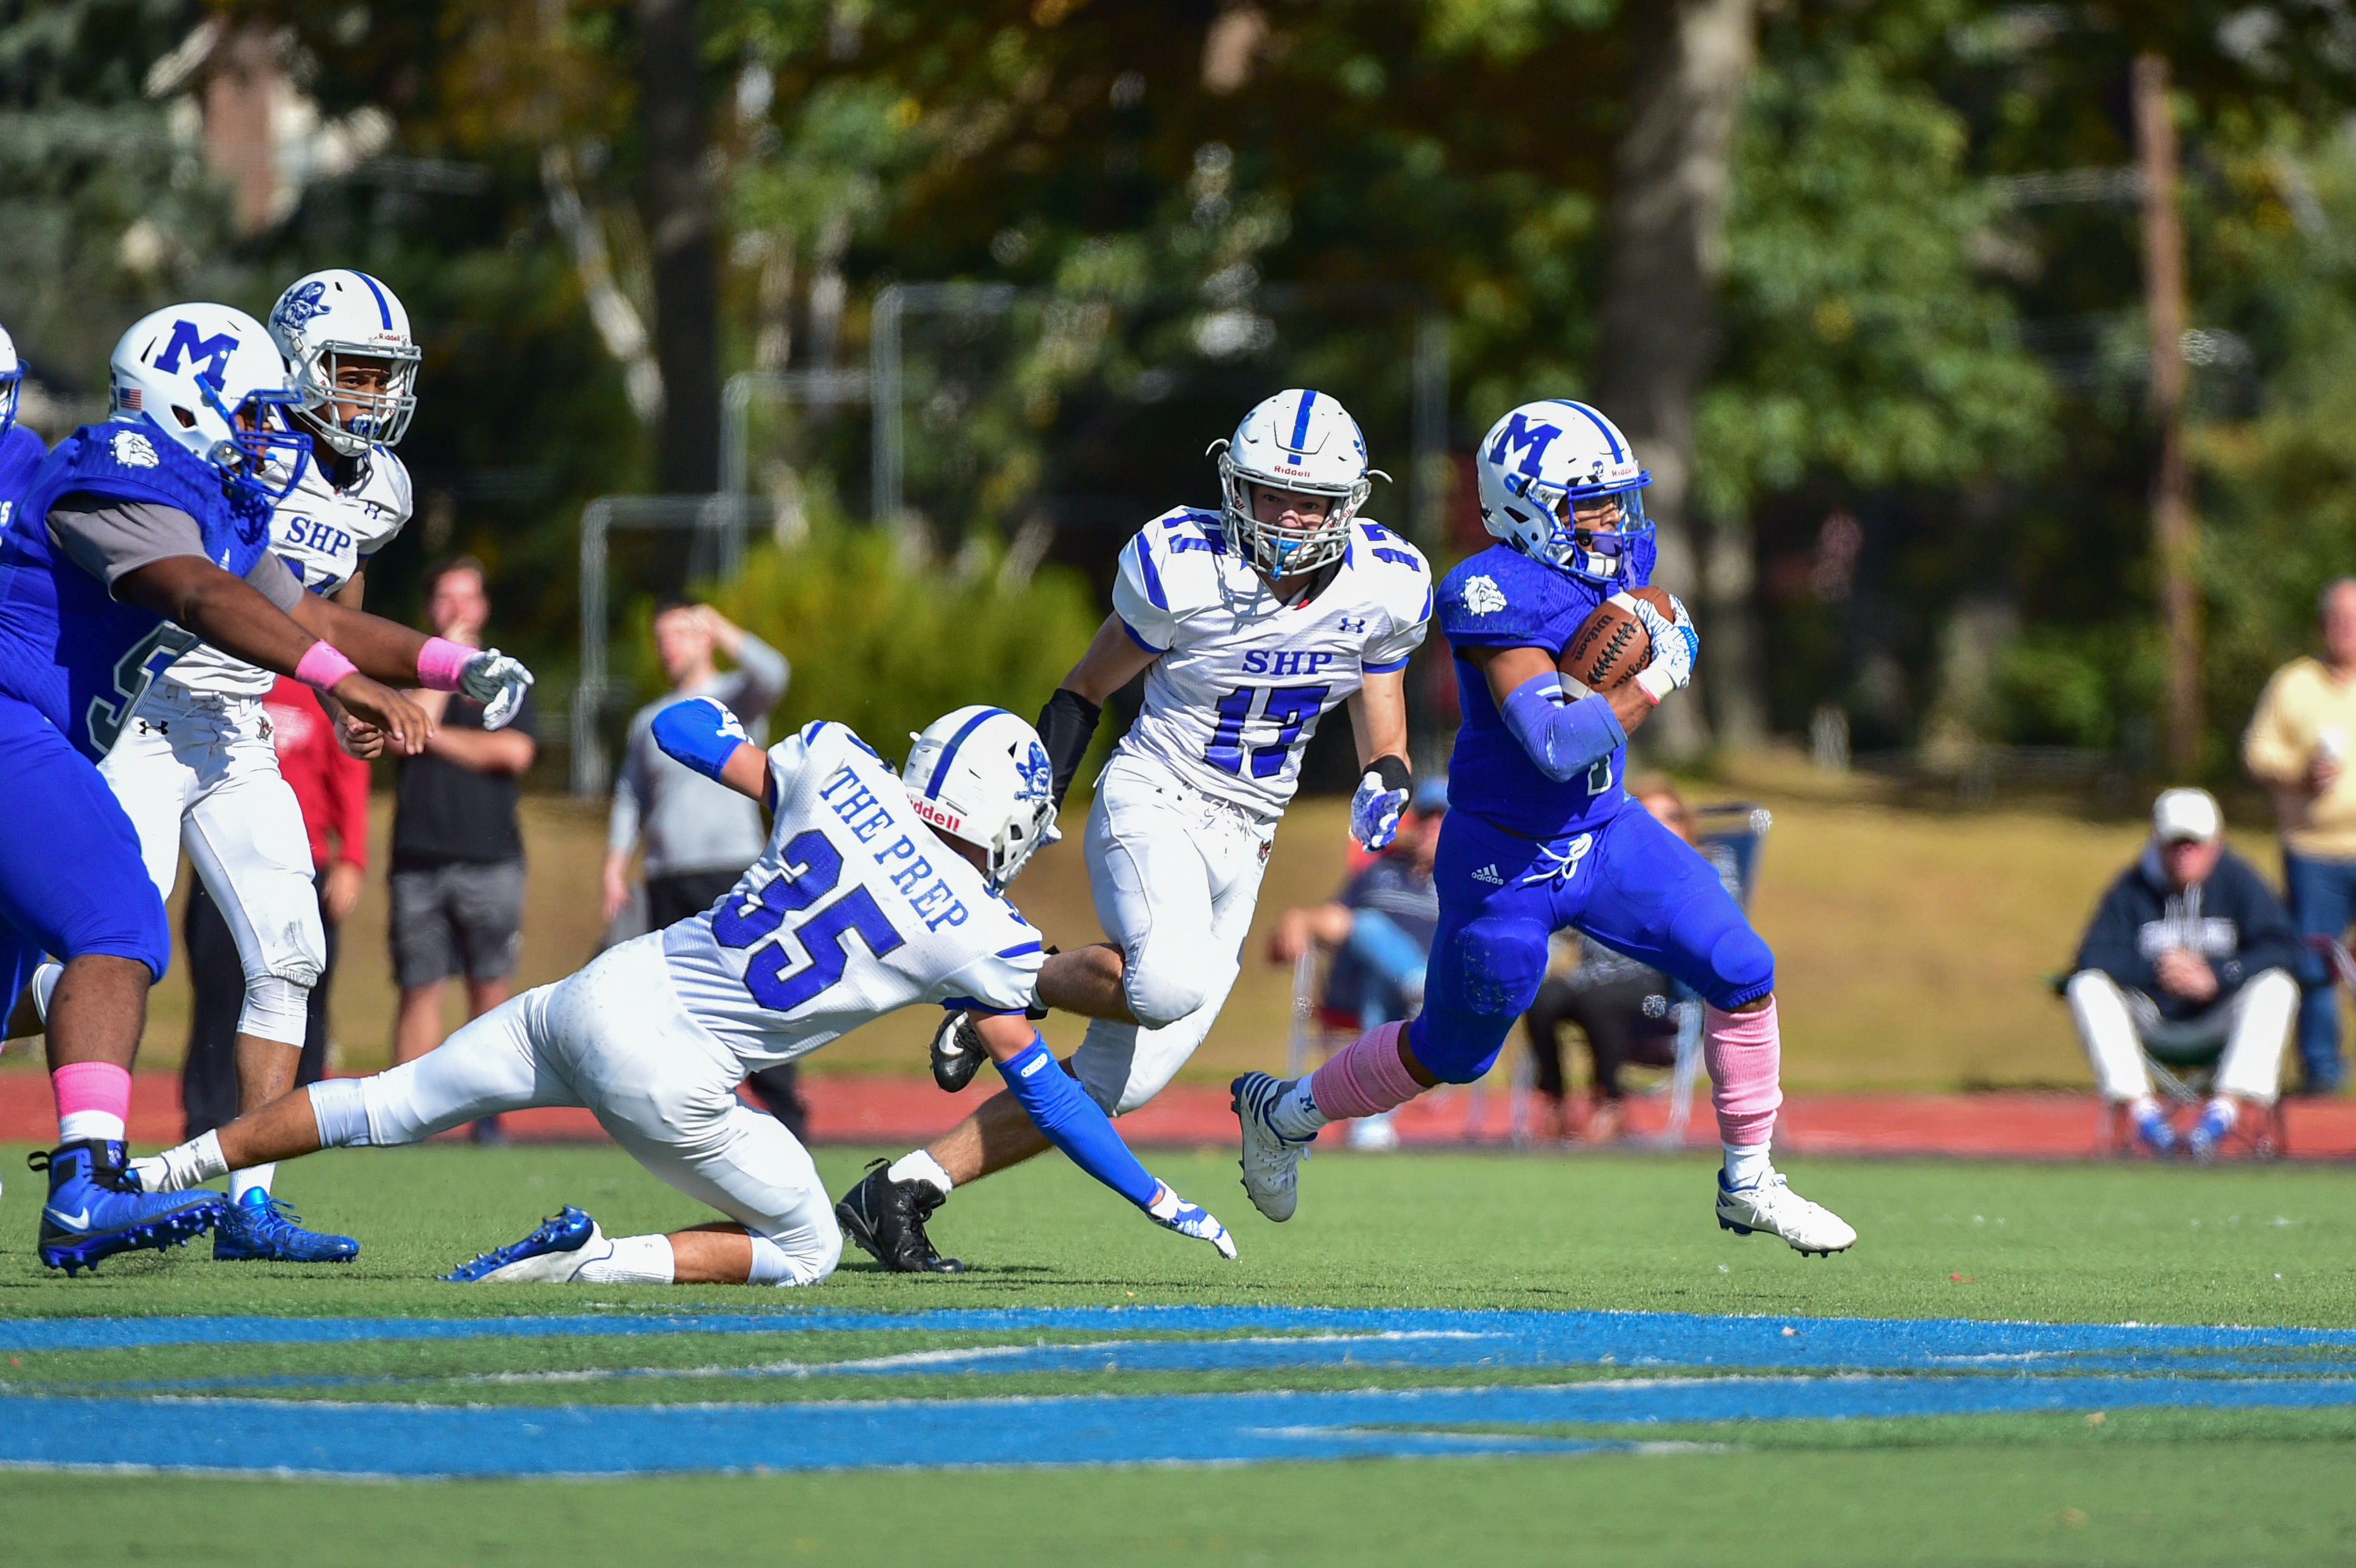 Montclair Football Notebook: Columbia Preview, Webb and Team stats, Power Point update